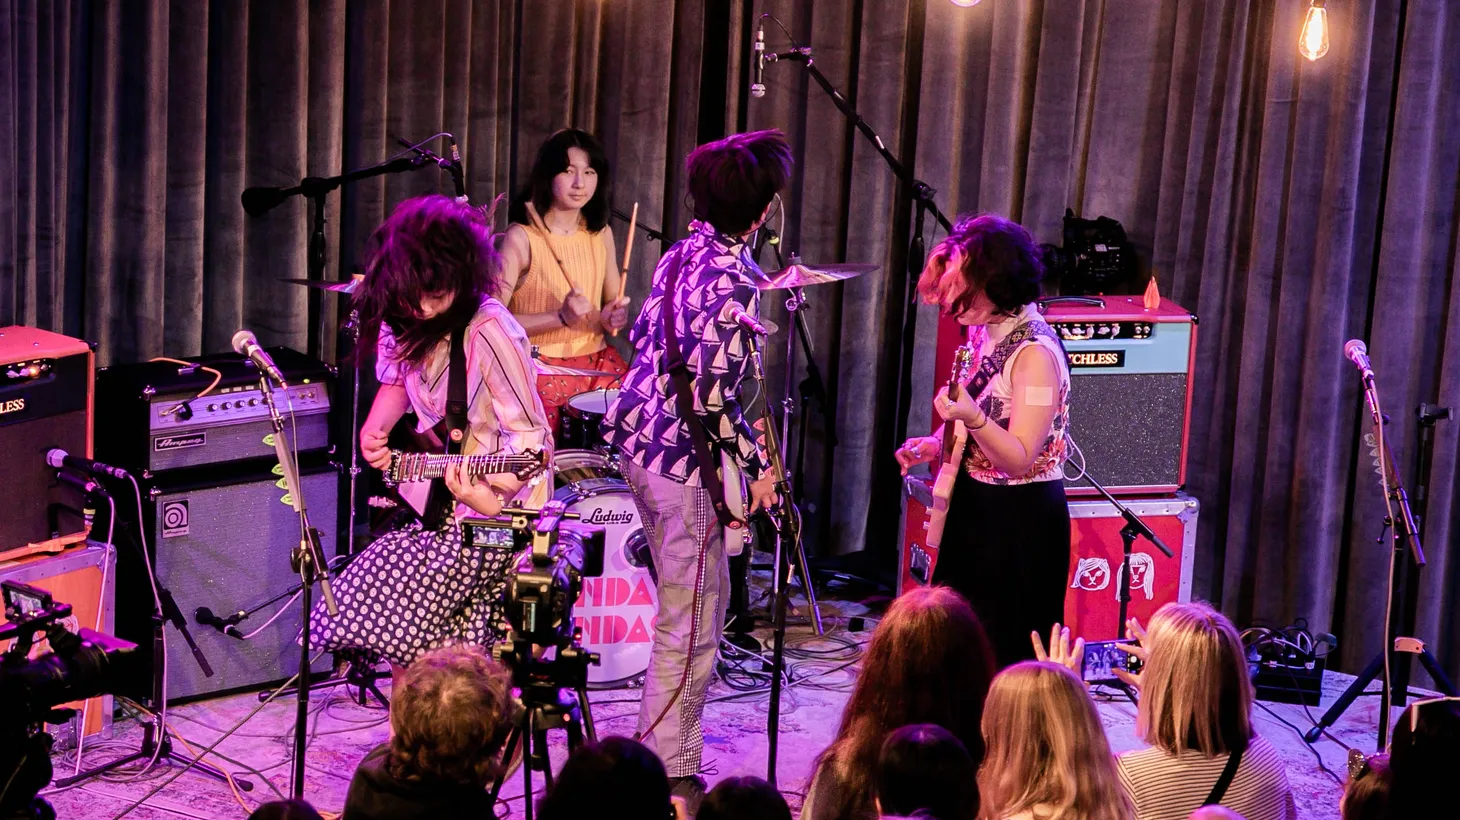 The Linda Lindas serve spectacular side-eye to the patriarchy Live From KCRW’s Annenberg Performance Studio.